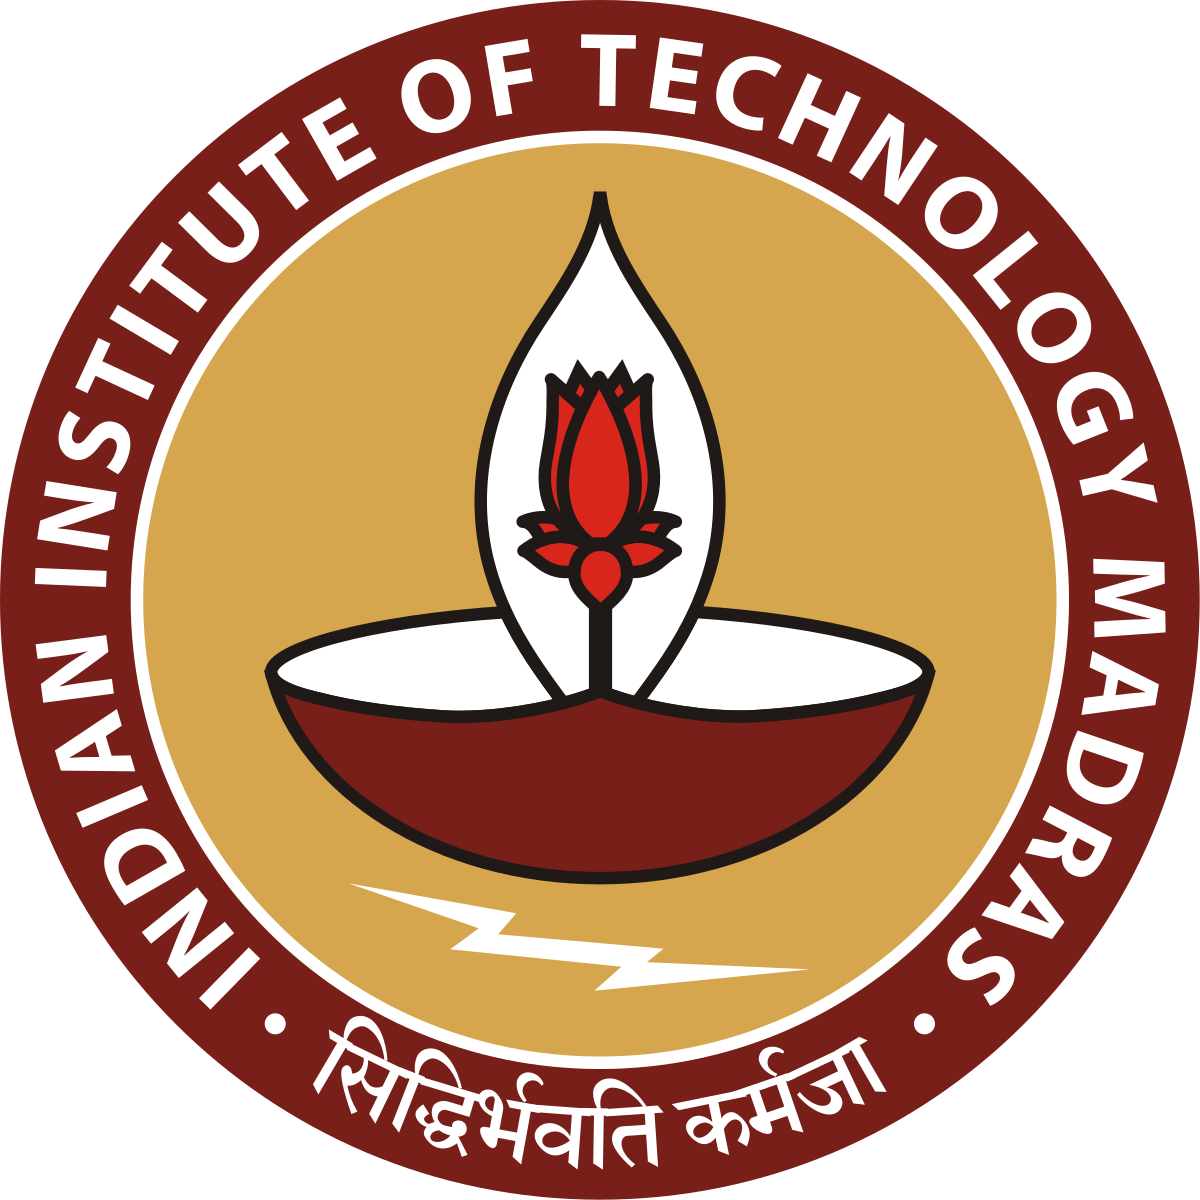 Indian Institute of Technology Madras - Wikipedia